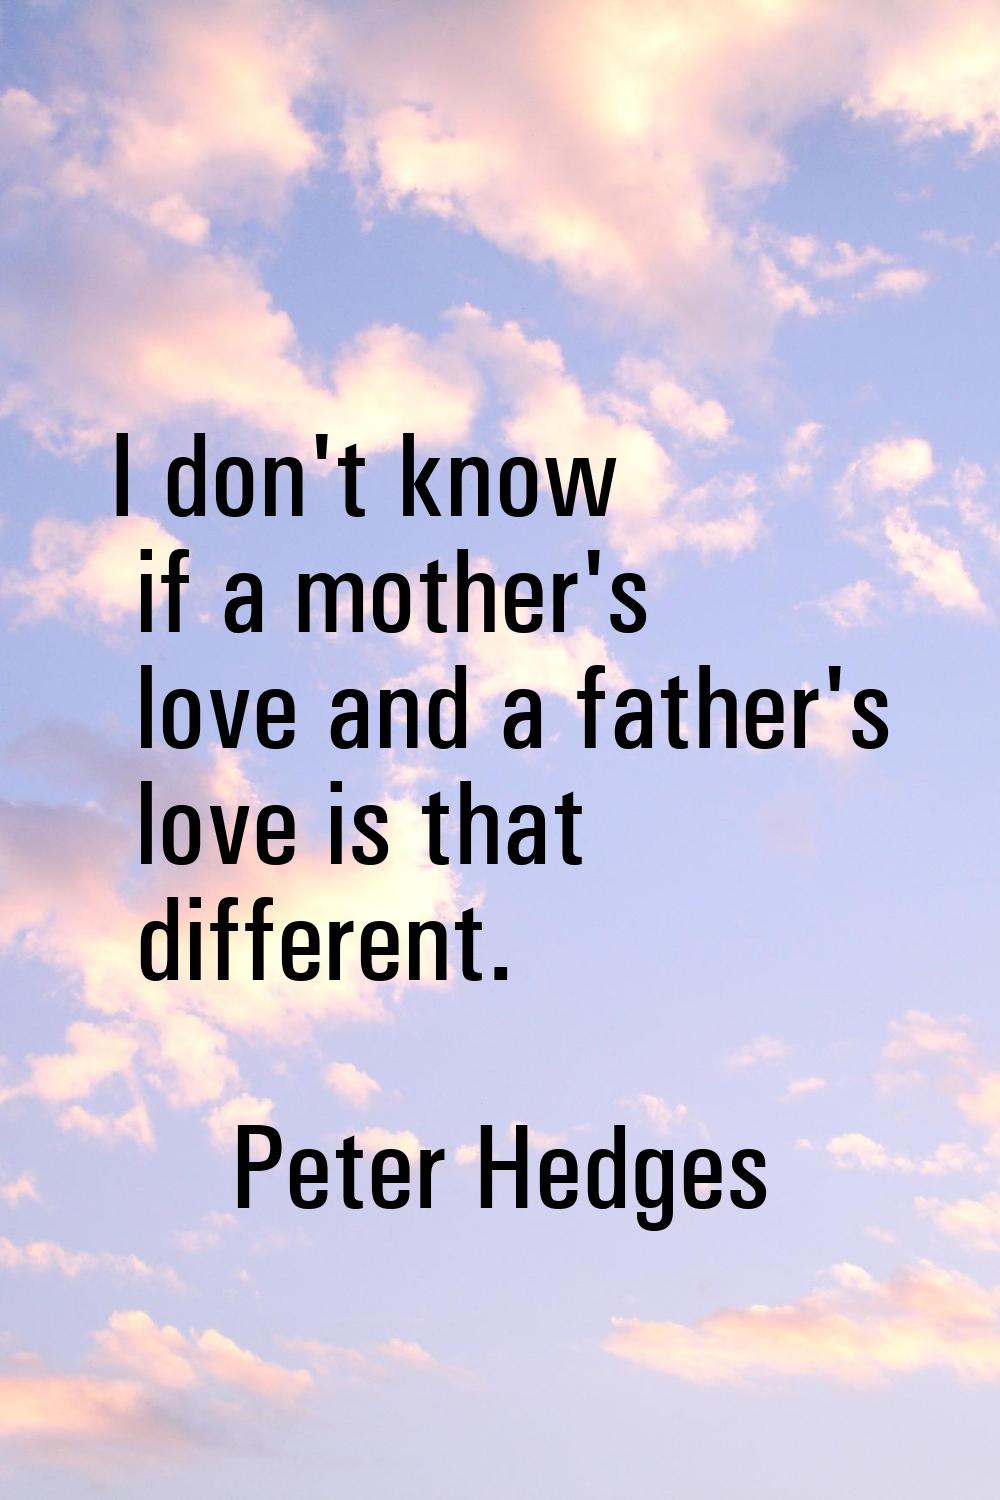 I don't know if a mother's love and a father's love is that different.